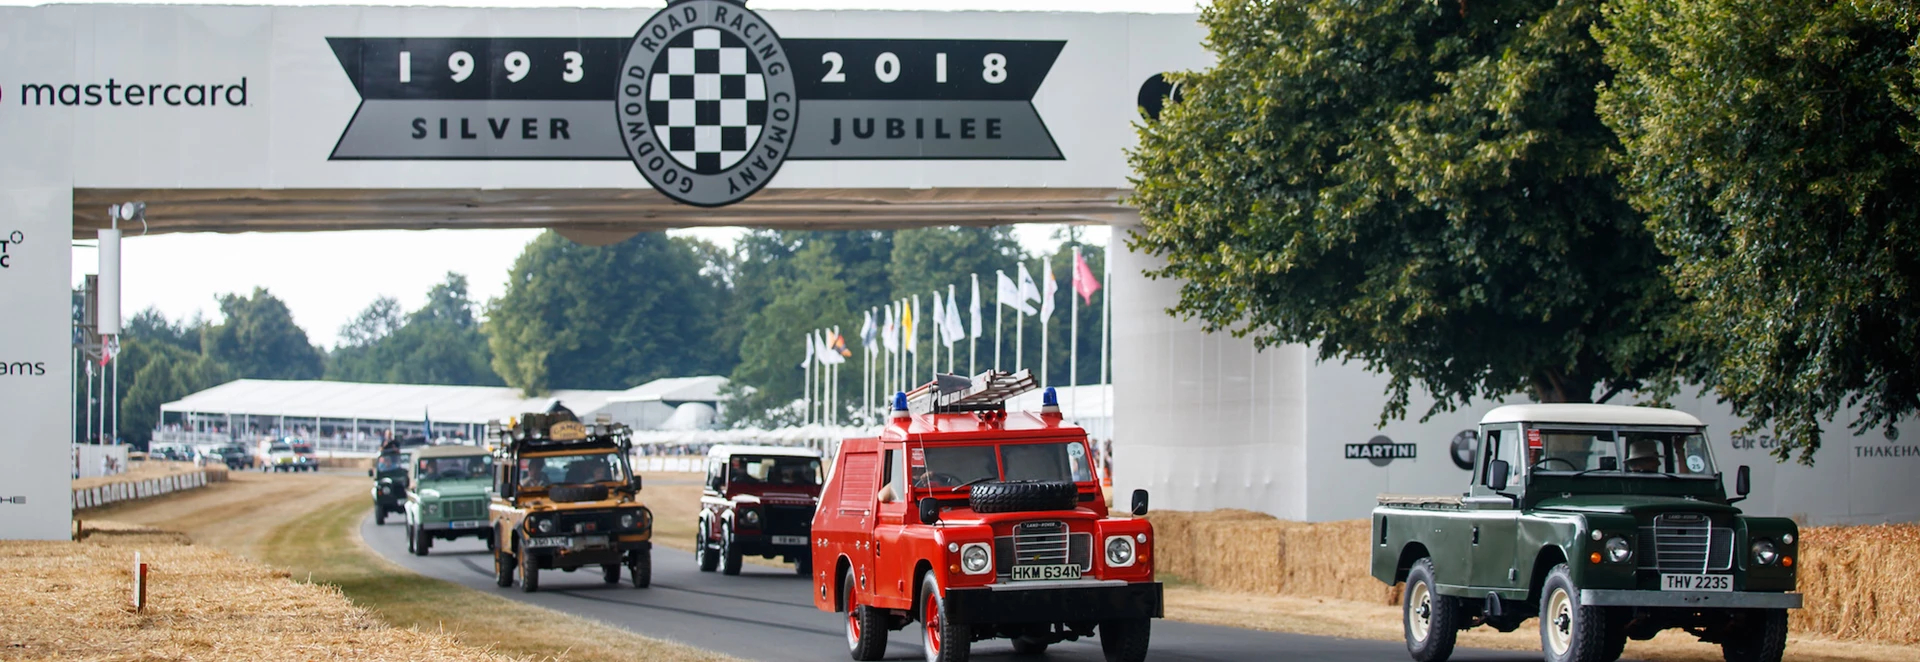 Land Rover celebrates 70th anniversary at Goodwood